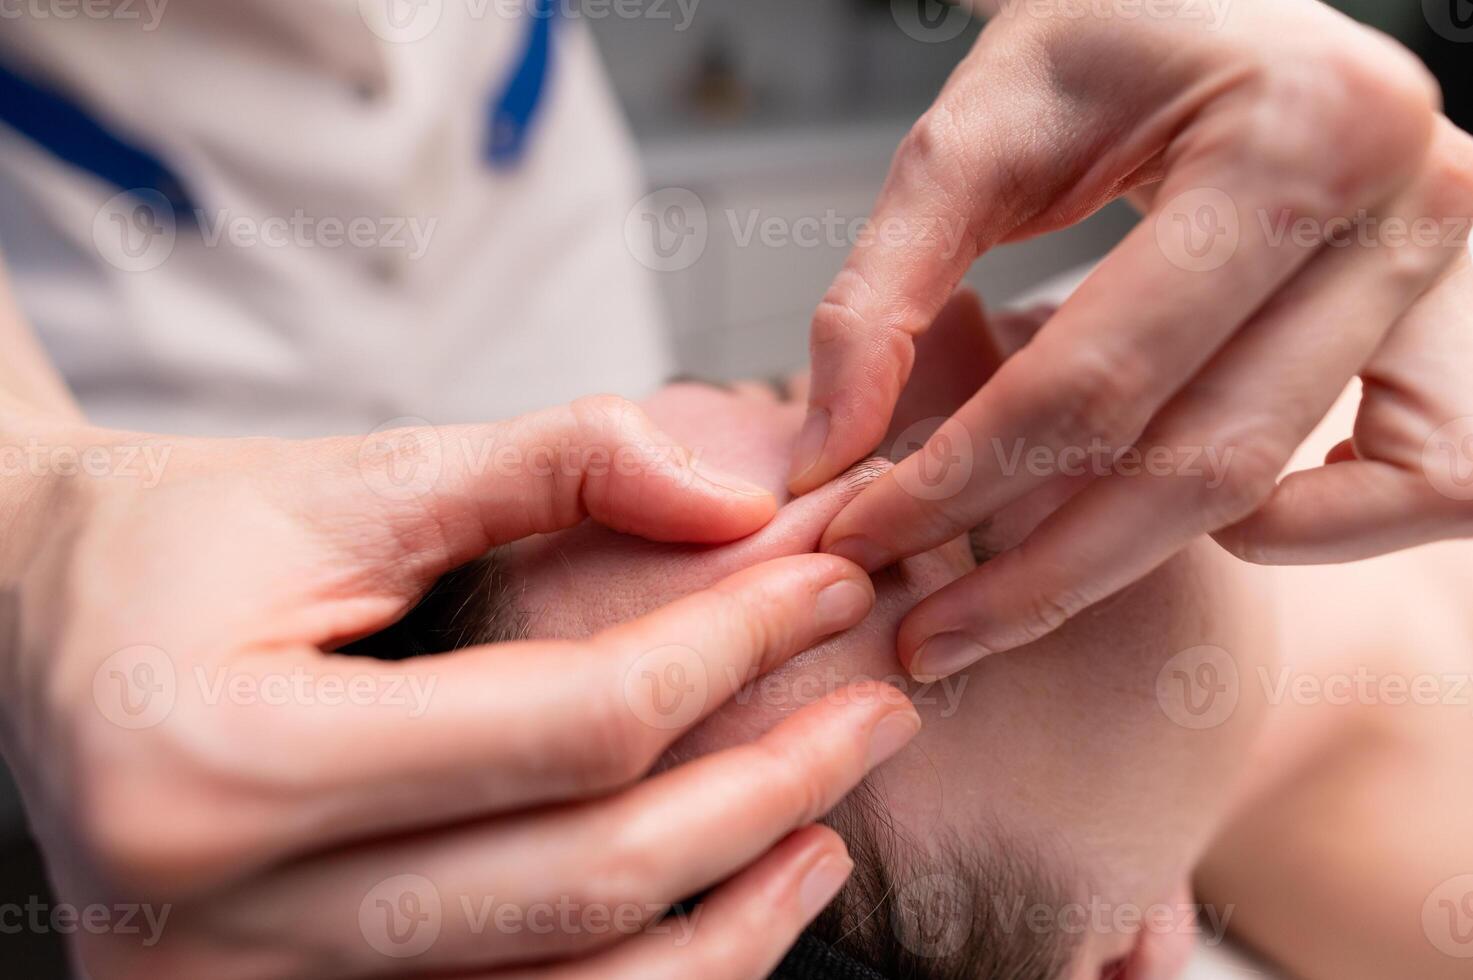 Close-up shot of a woman's head doing a facial massage on a treatment table. Therapist applying pressure with thumbs on forehead photo